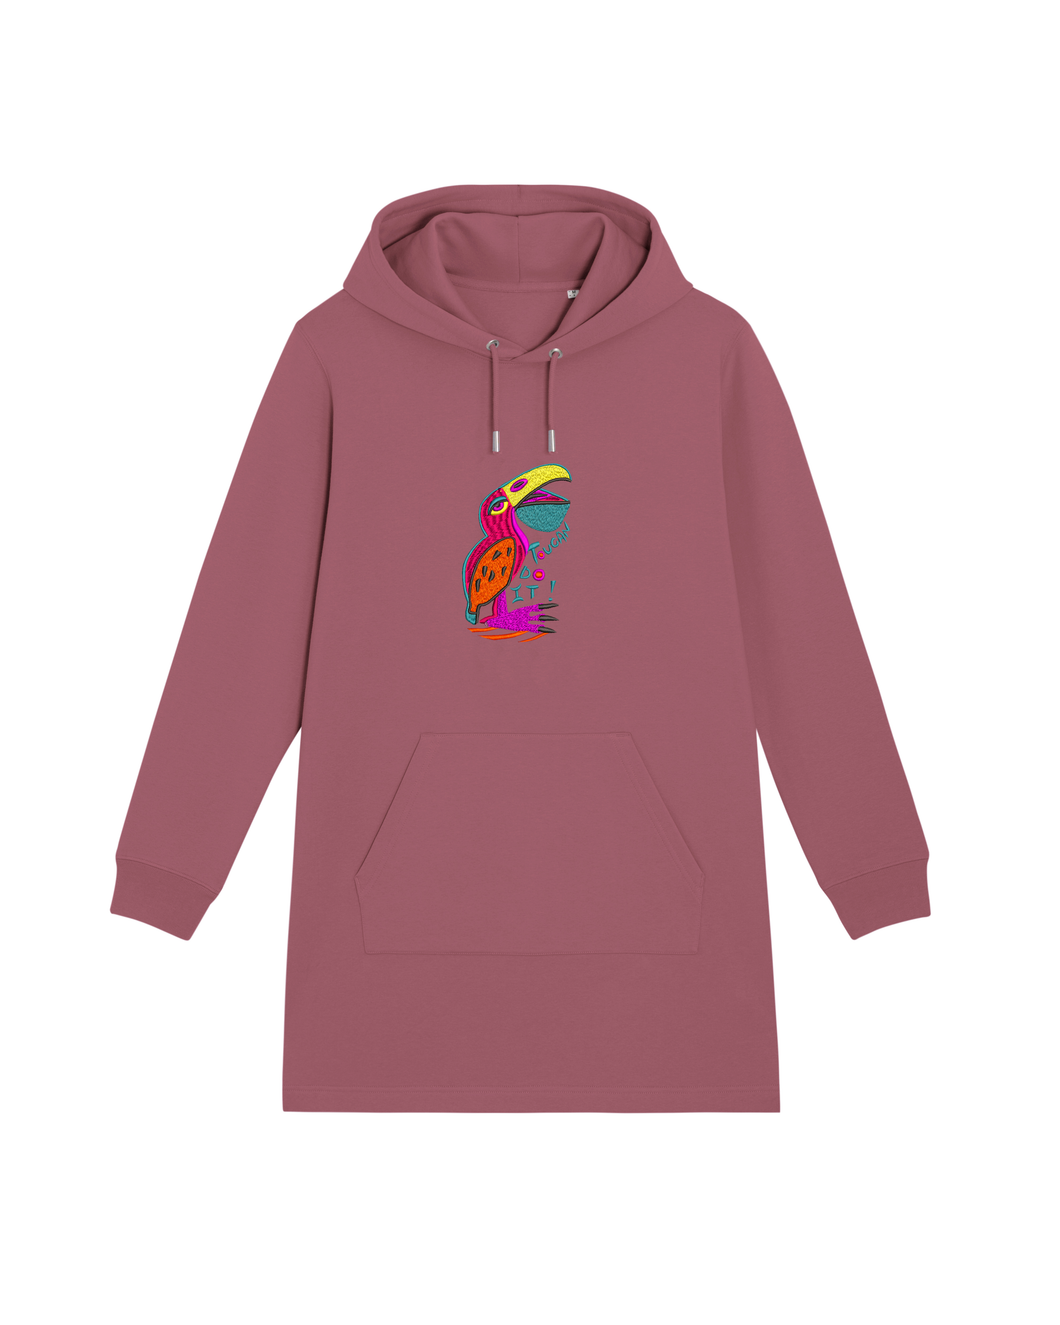 TOUCAN do it! 🐦- Embroidered WOMEN'S HOODIE DRESS